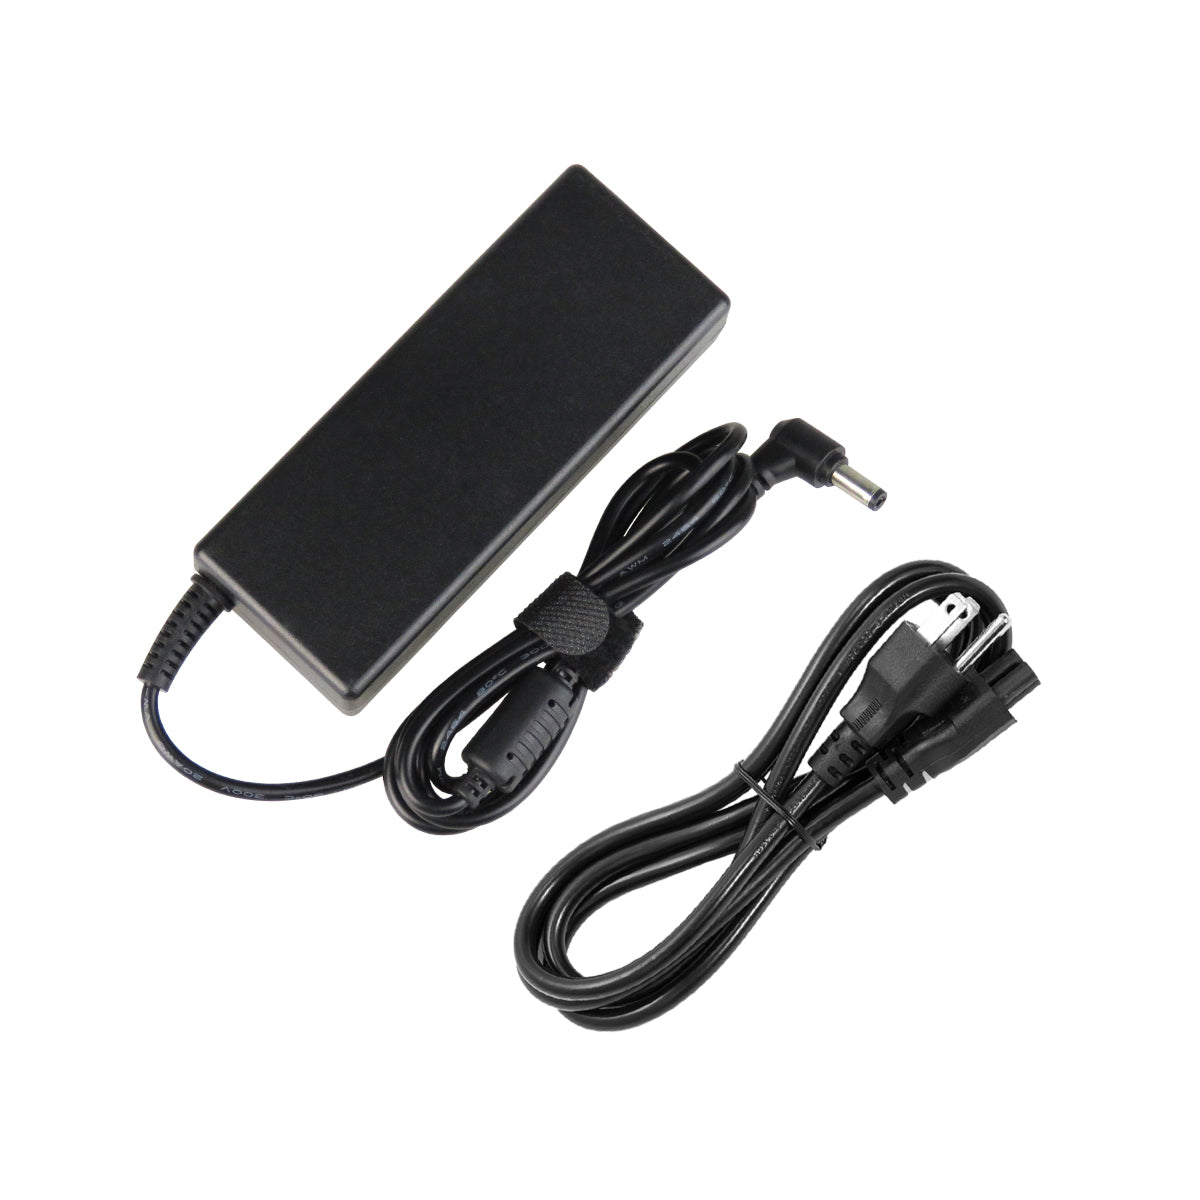 AC Adapter Charger for Gateway MT6910 Notebook.